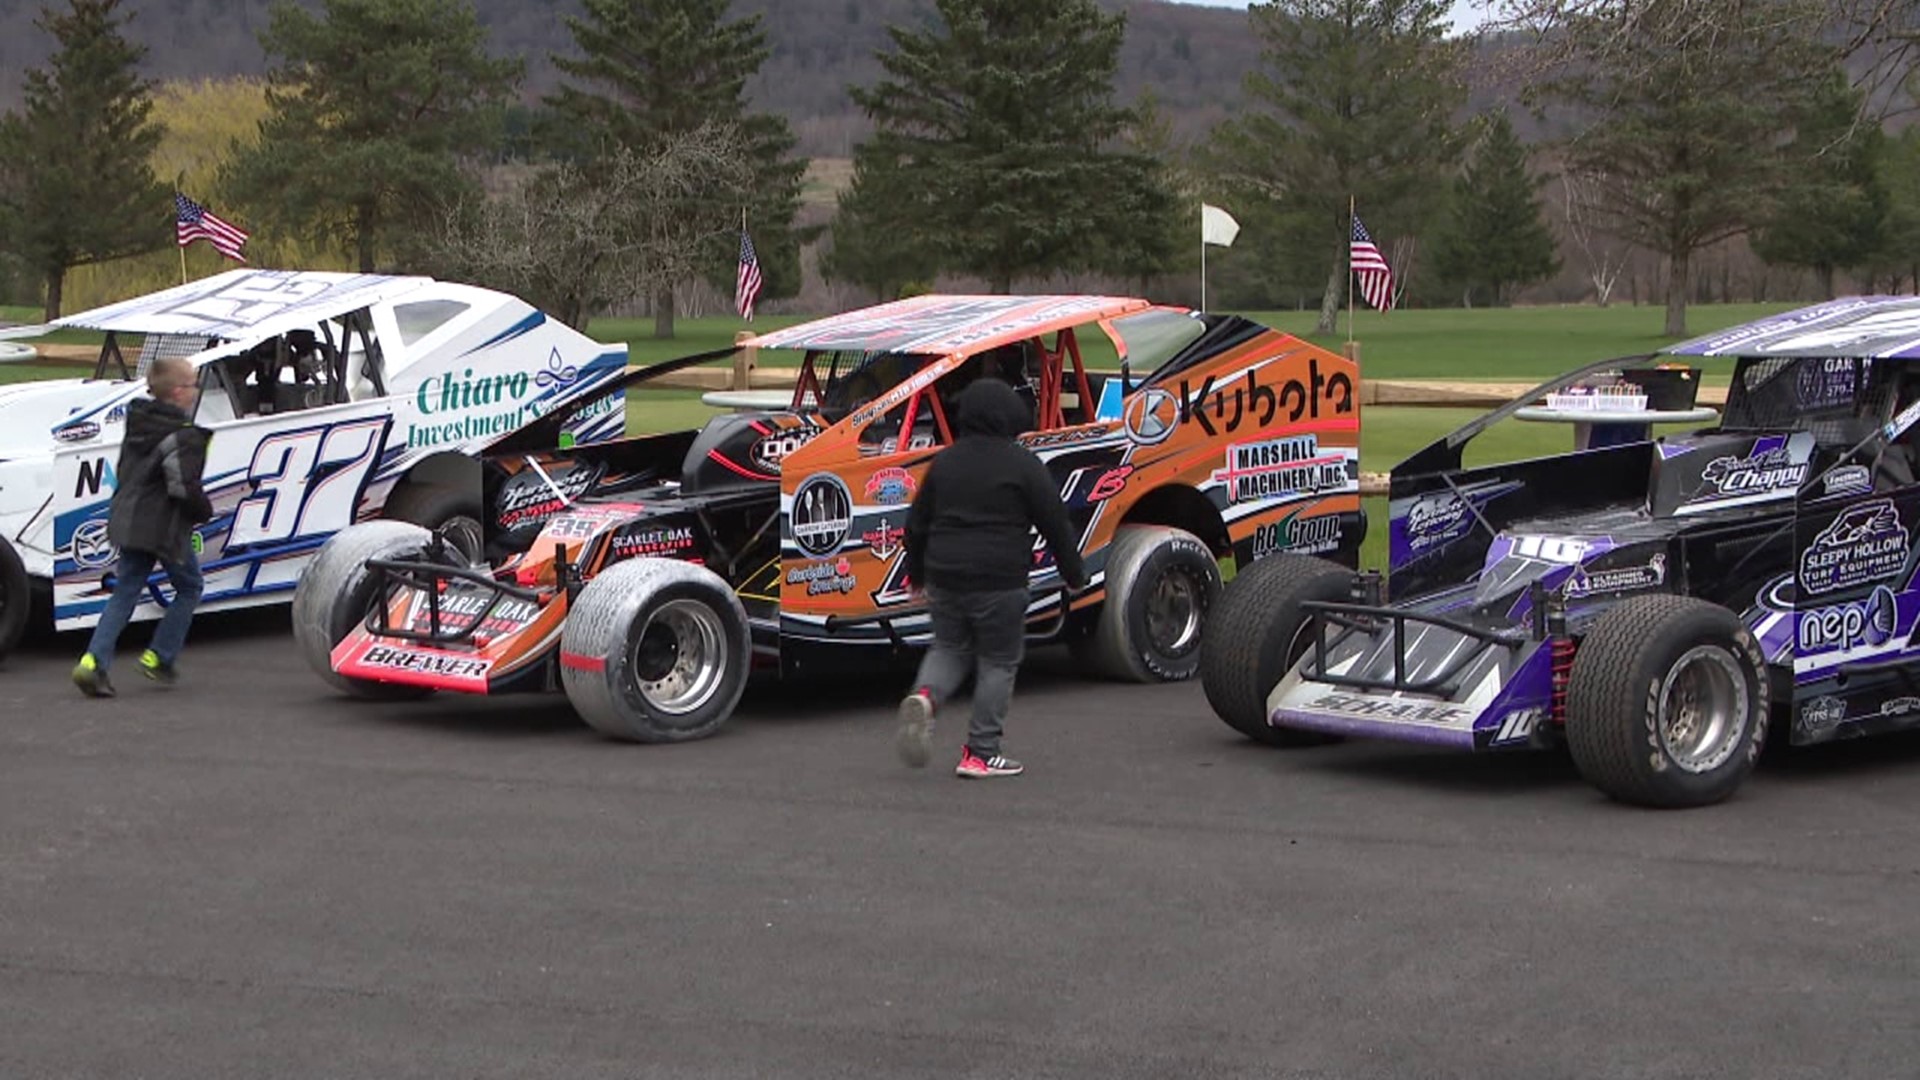 Dozens of race cars were on display Sunday afternoon at the Sleepy Hollow Golf Course in Greenfield Township.